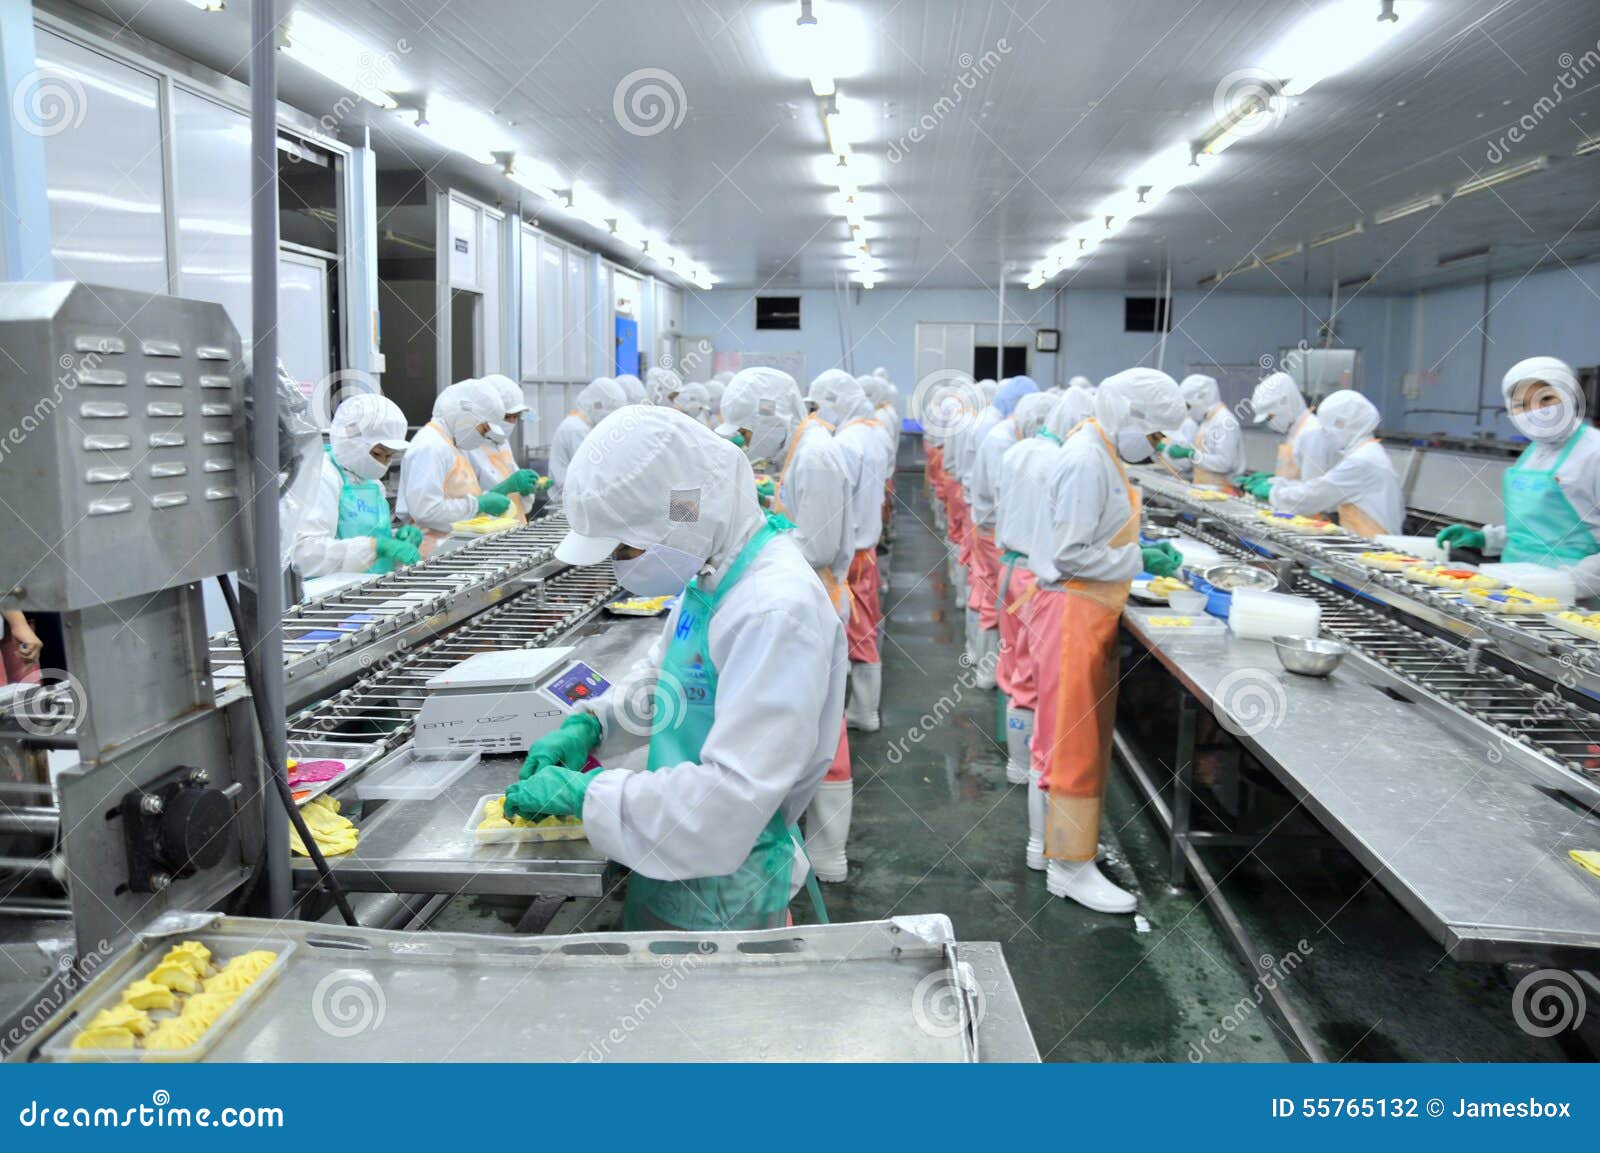 food processing business plans